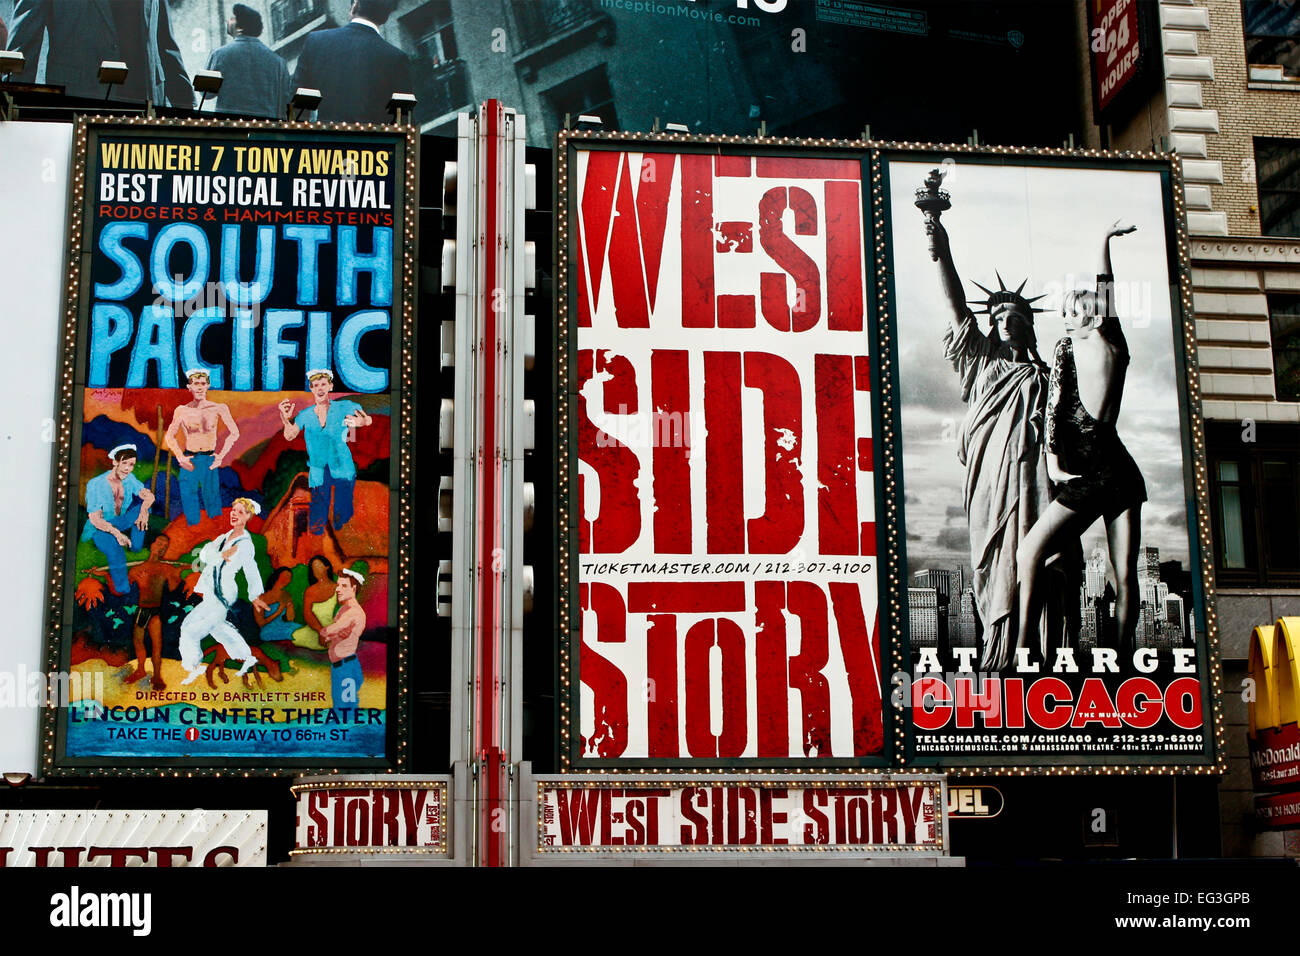 Broadway musical ads for shows, along 42nd Street at Times Square. Advertising billboard sign. Theater district. Manhattan, New York City NYC, NY, USA Stock Photo